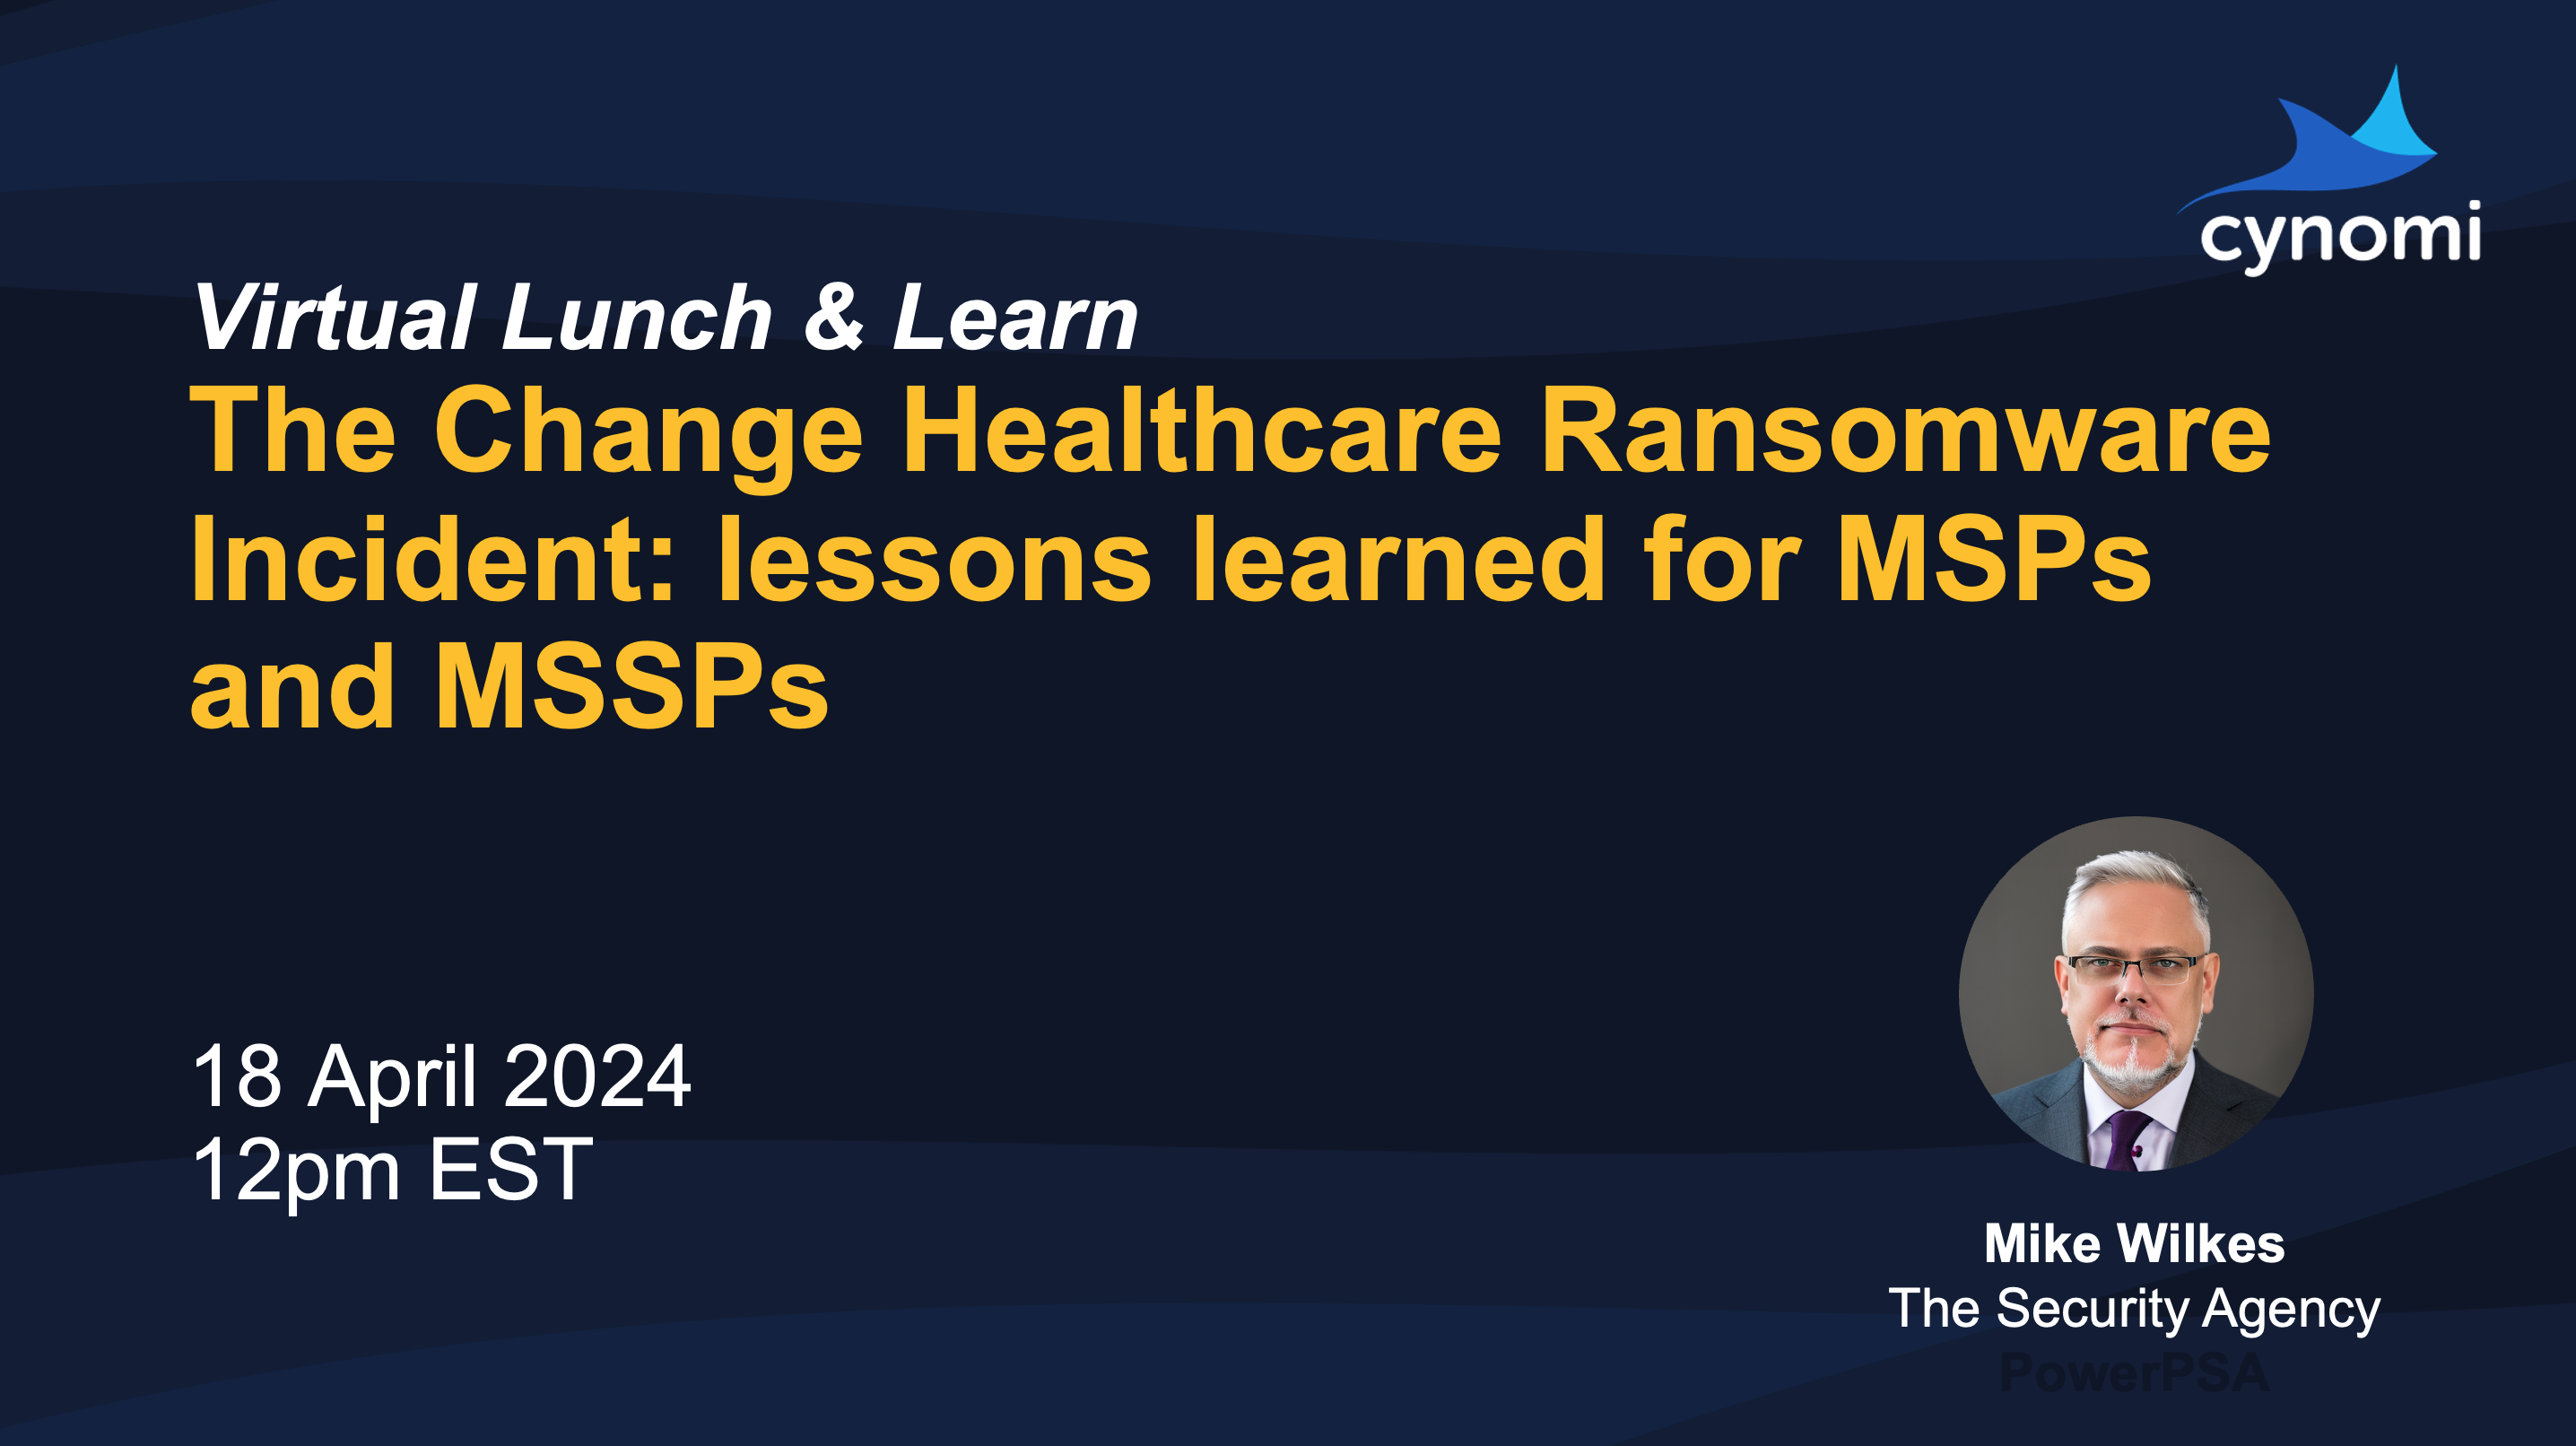 Virtual Lunch & Learn The Change Healthcare Ransomware Incident: lessons learned for MSPs and MSSPs